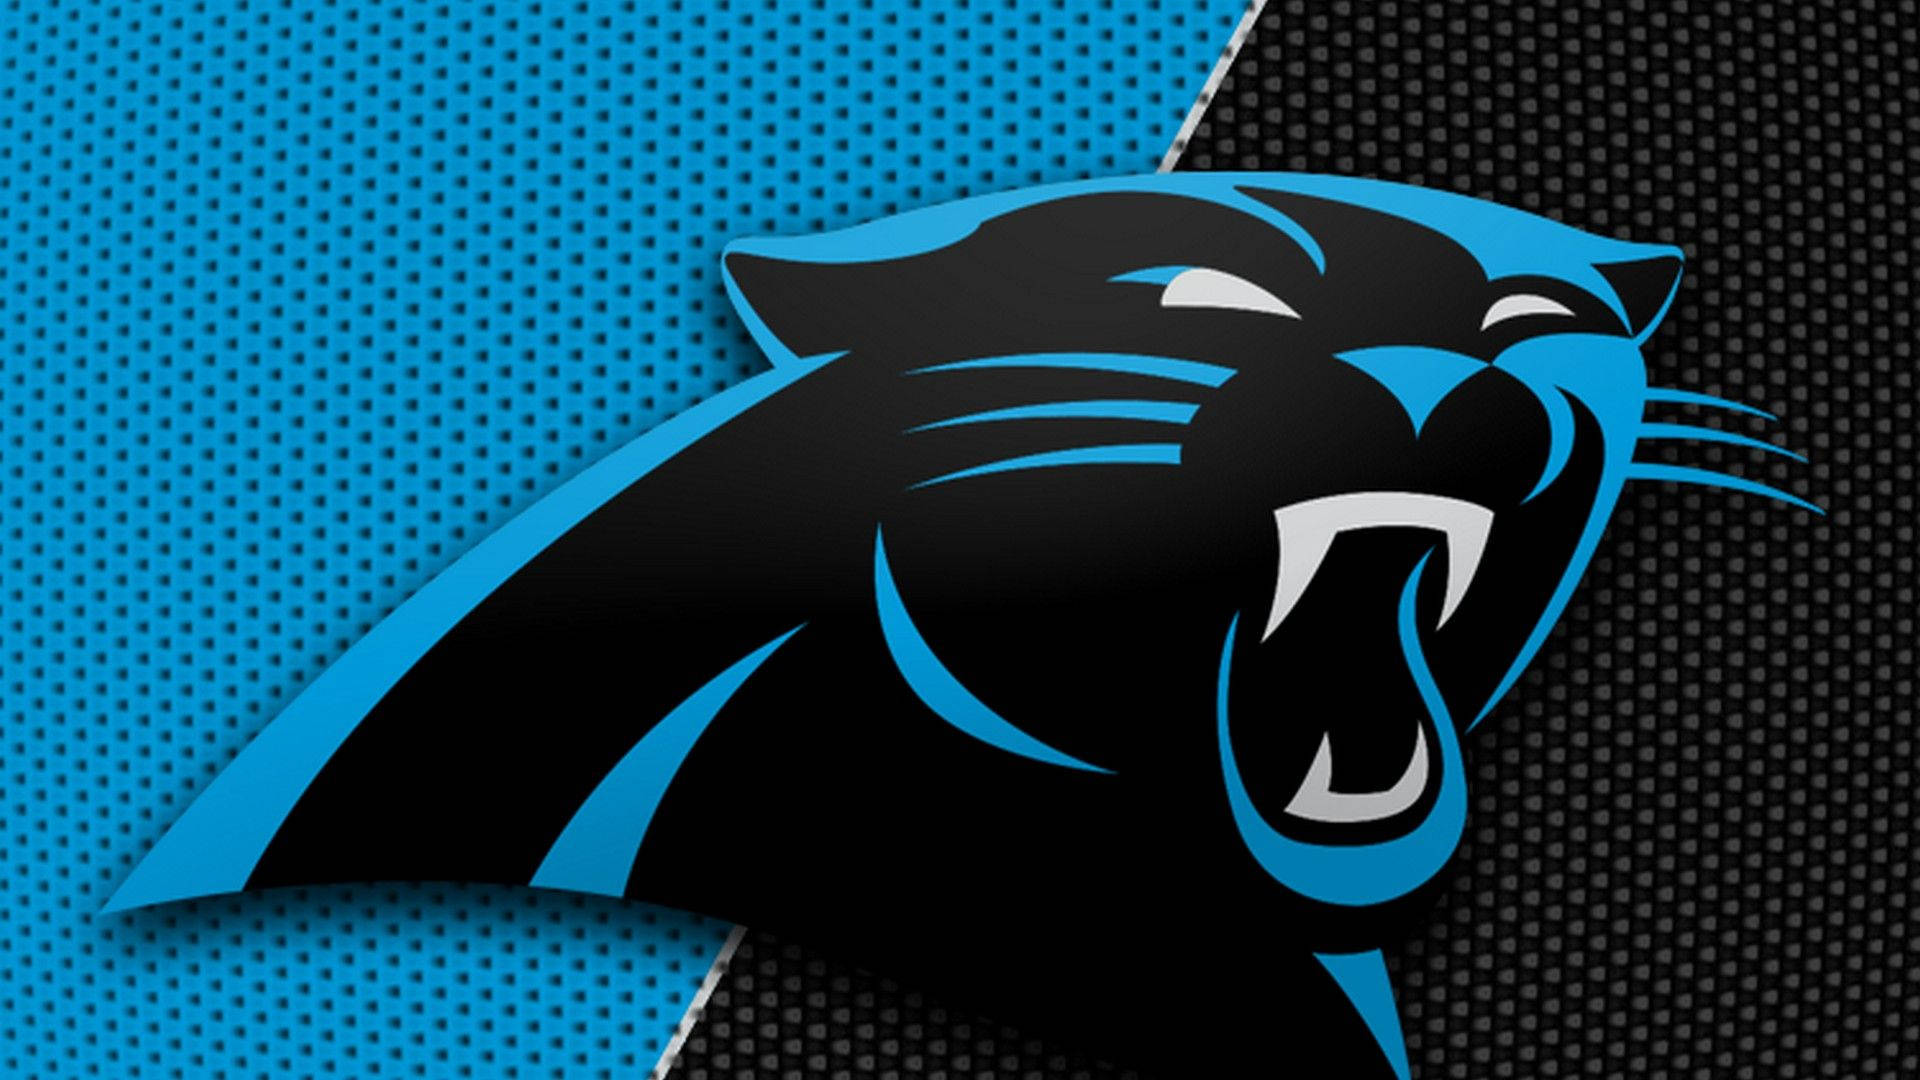 HD wallpaper carolina panthers for mac text real people western script   Wallpaper Flare